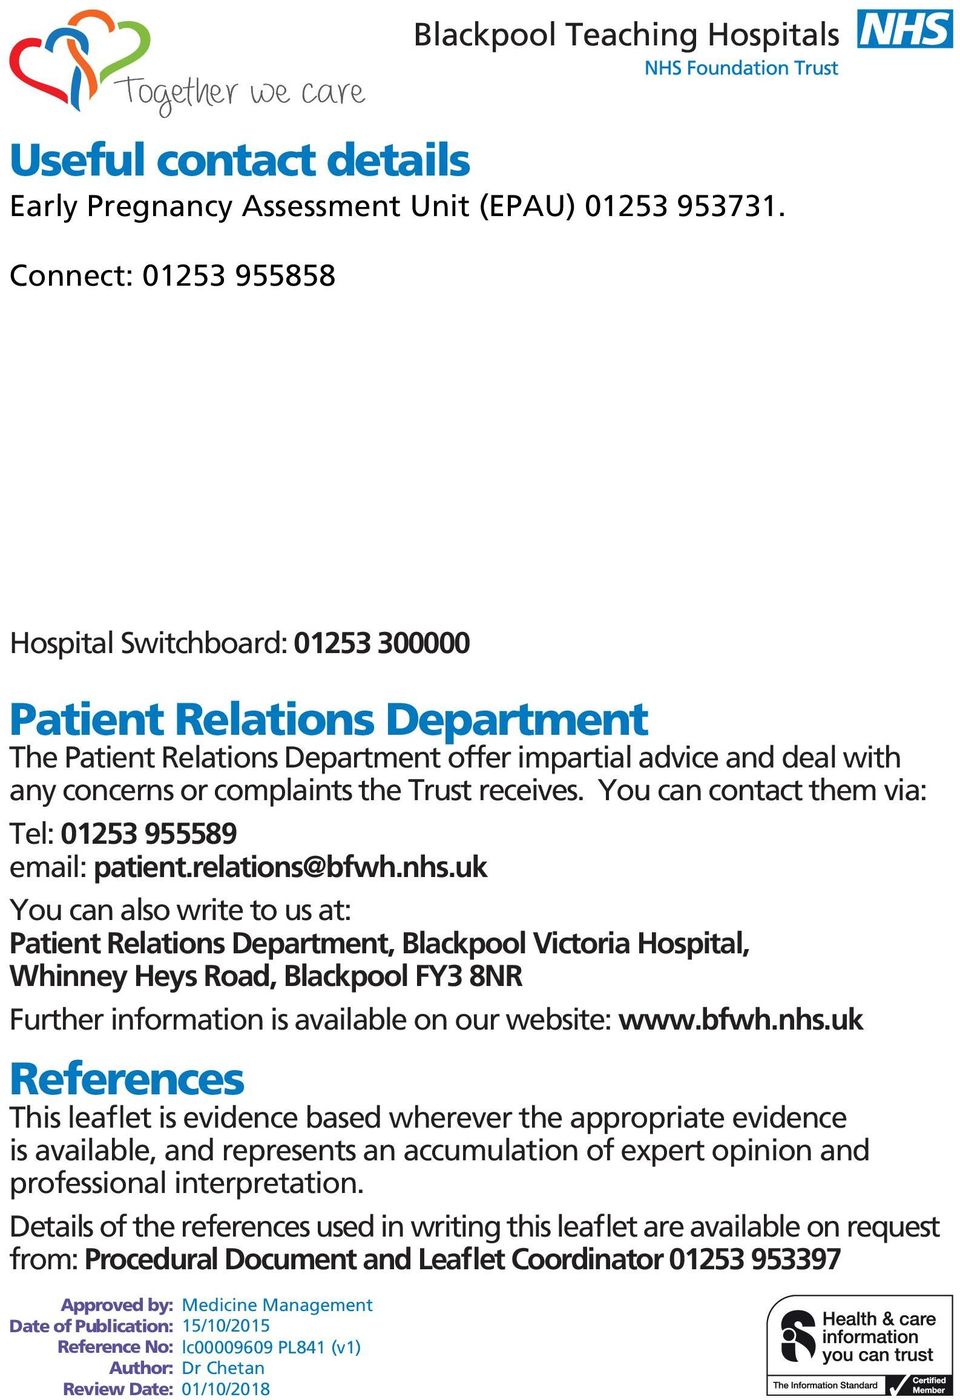 receives. You can contact them via: Tel: 01253 955589 email: patient.relations@bfwh.nhs.